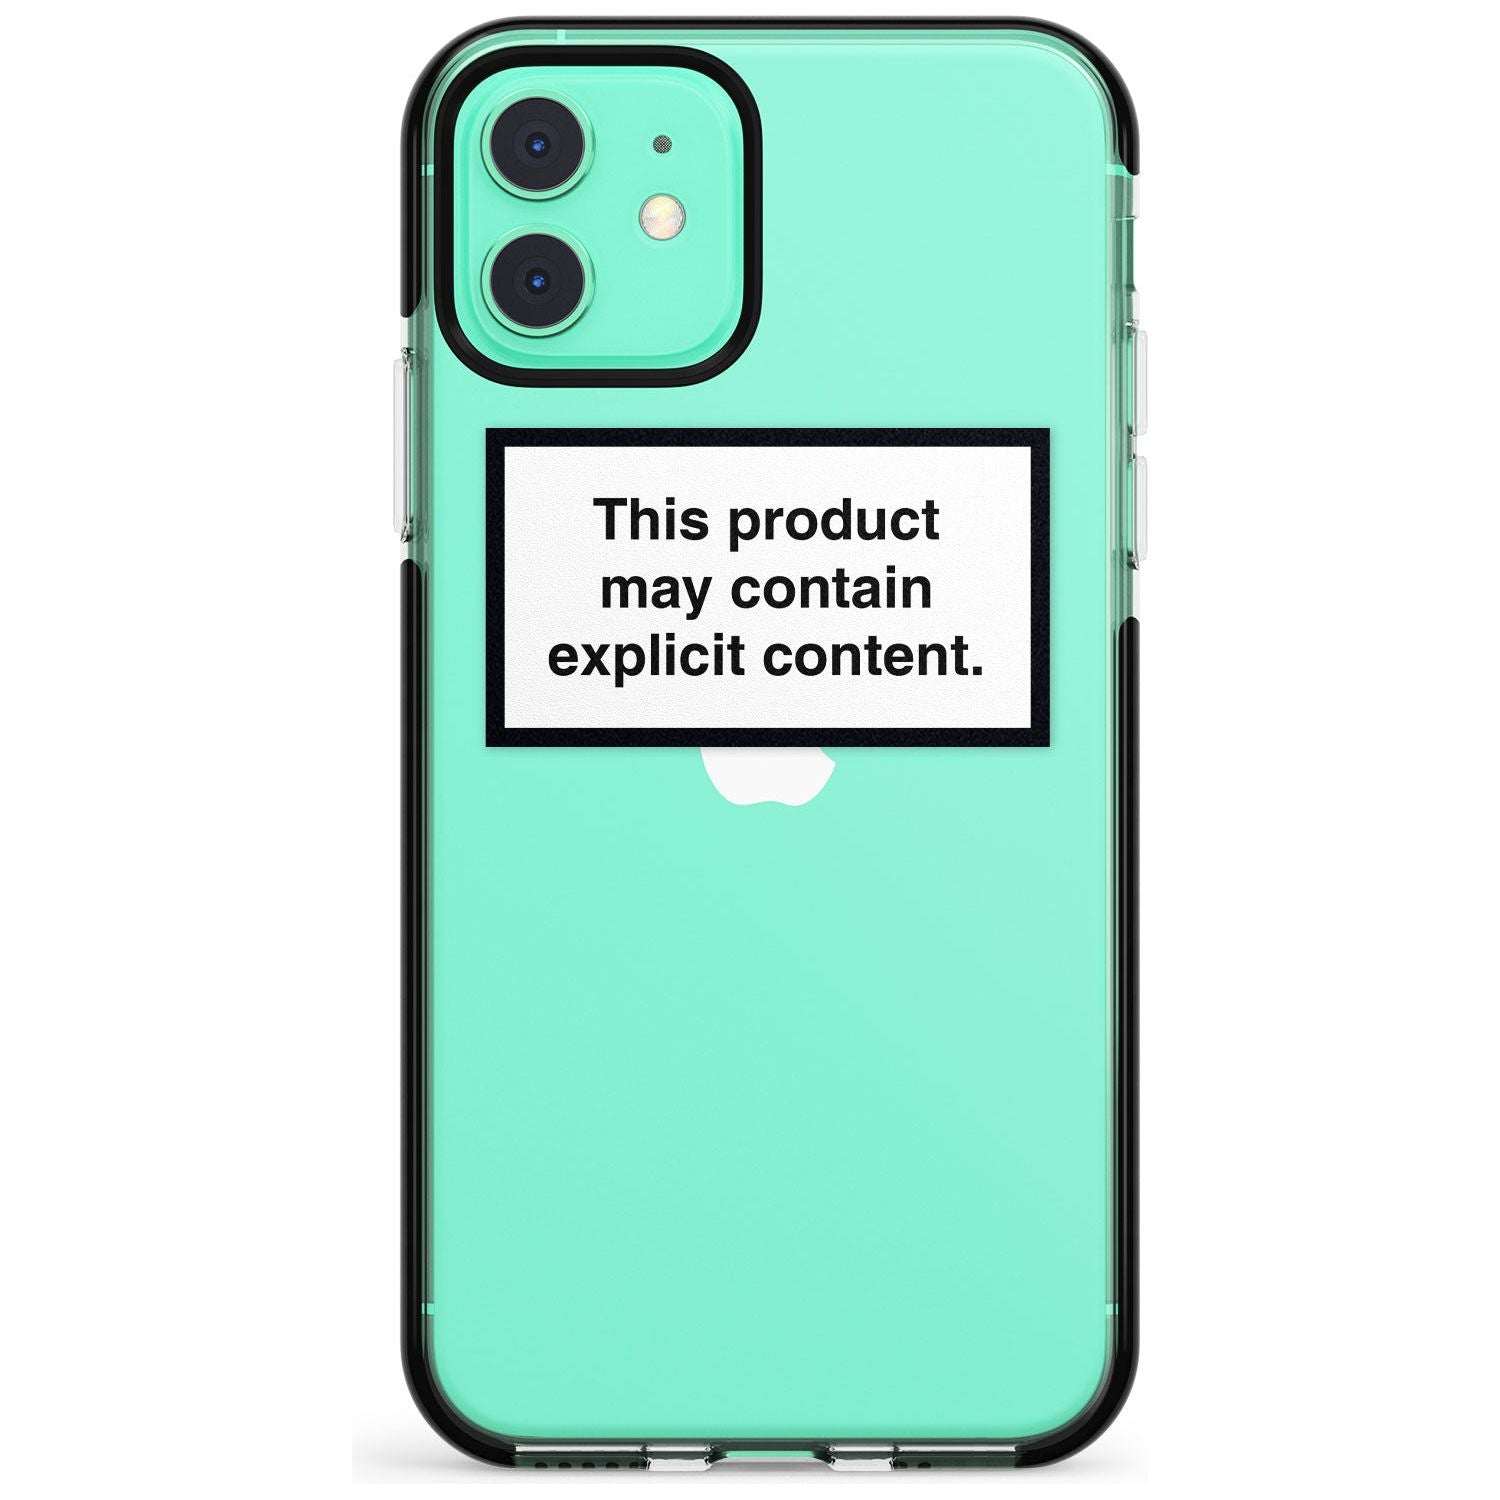 This product may contain explicit content Pink Fade Impact Phone Case for iPhone 11 Pro Max